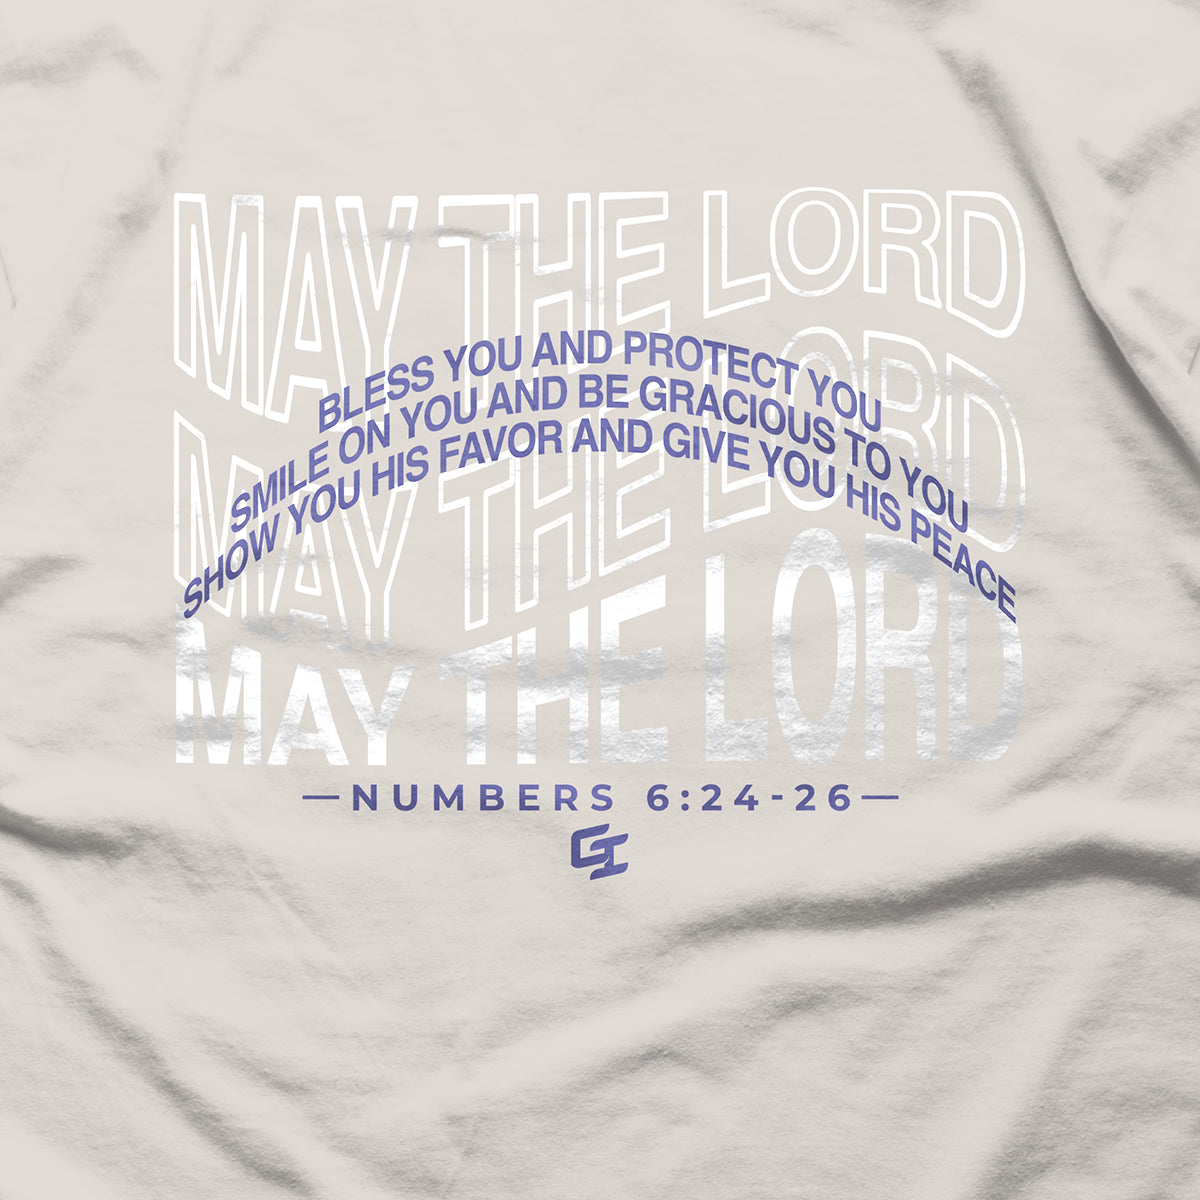 [Limited Edition] 'May The Lord' Lightweight T-Shirt